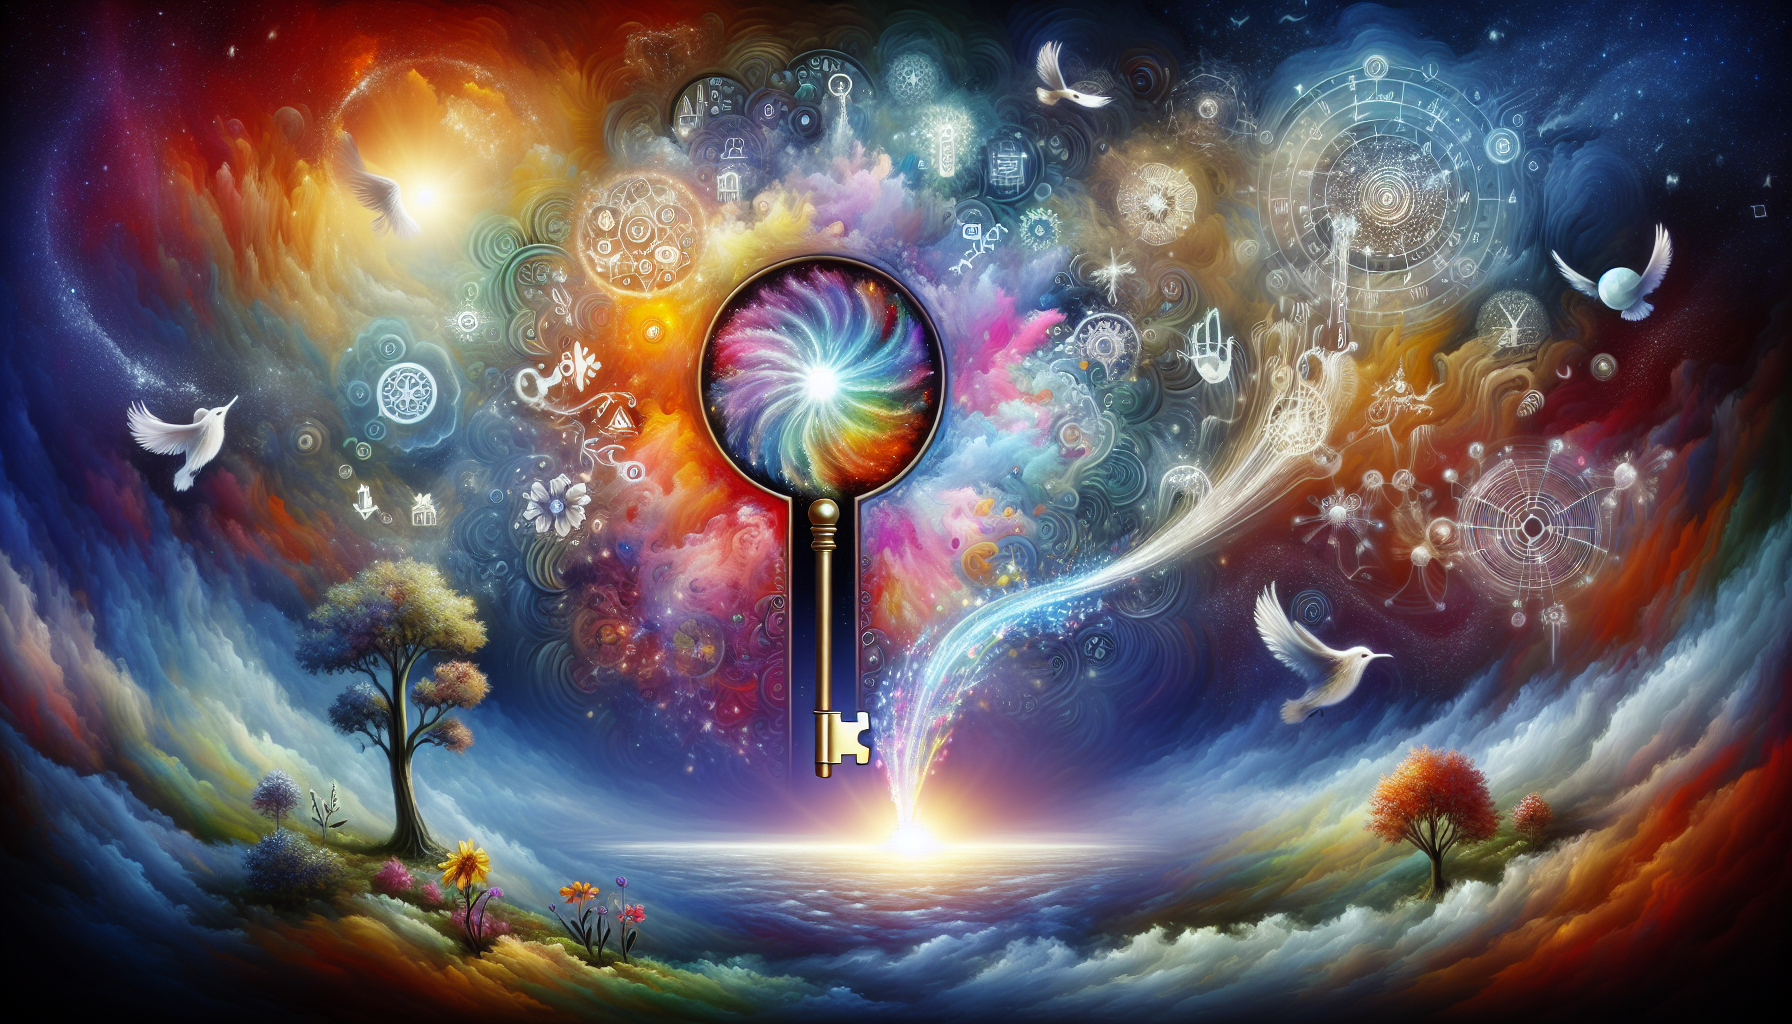 A metaphorical representation of unlocking creativity and intuition through the law of attraction. This can be depicted as a powerful key opening an ethereal lock, from which radiates a blend of brilliant colors symbolizing creativity and a brilliantly light luminous thread characterizing intuition. Surrounding this scene are manifestations of the law of attraction i.e., visions of success, positivity, and empowerment in the form of symbols like flowering trees, rising sun, and harmonious landscapes. All depicting a serene and metaphysical landscape where the unseen forces are at work.